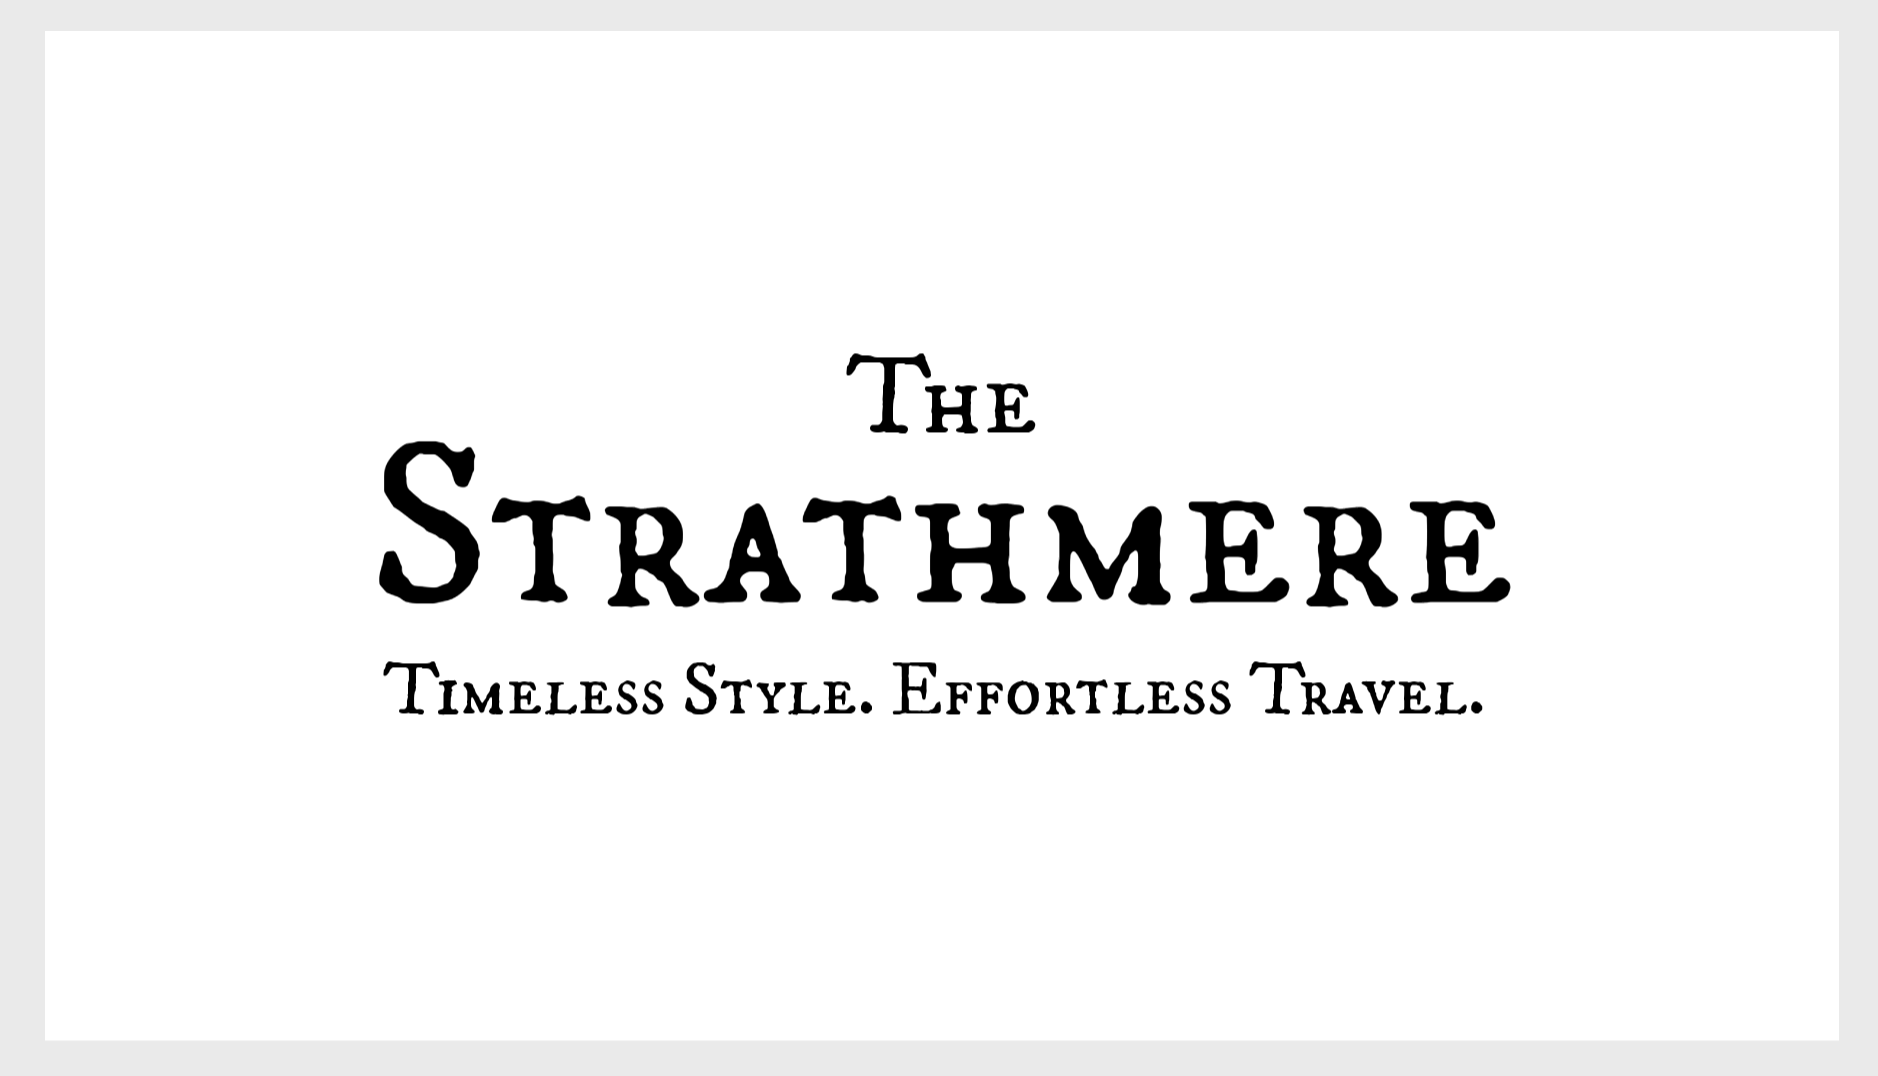 logo for the leather weekend bag "The Strathmere" with the tagline "Timeless Style. Effortless Travel." centered underneath.